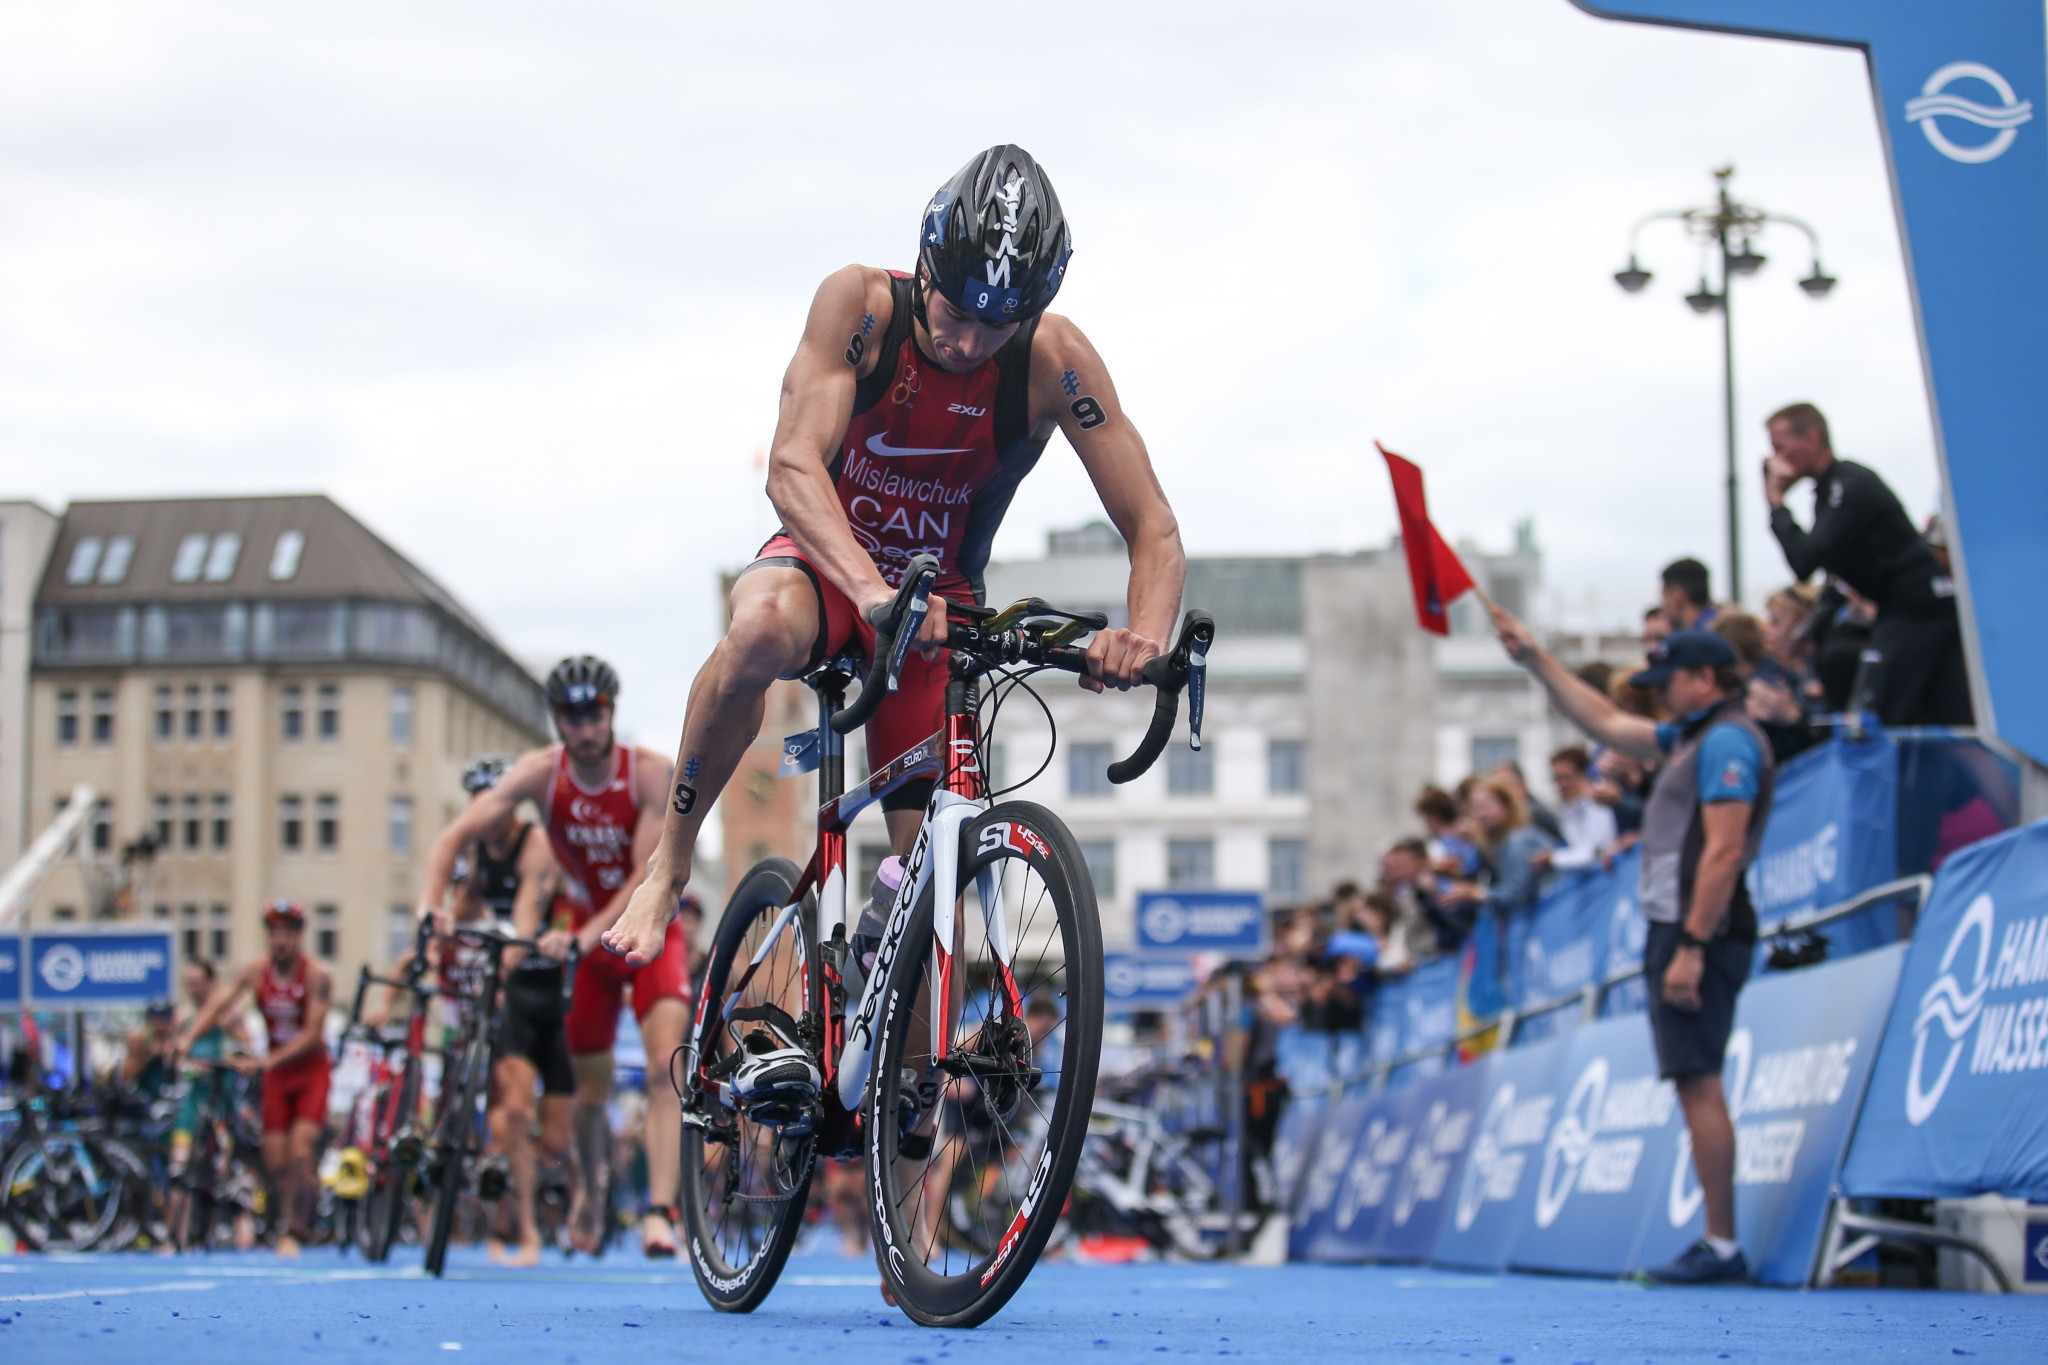 Tyler Mislawchuk triumphed at the Huatulco Triathlon World Cup in 2019 and 2021 ©Getty Images